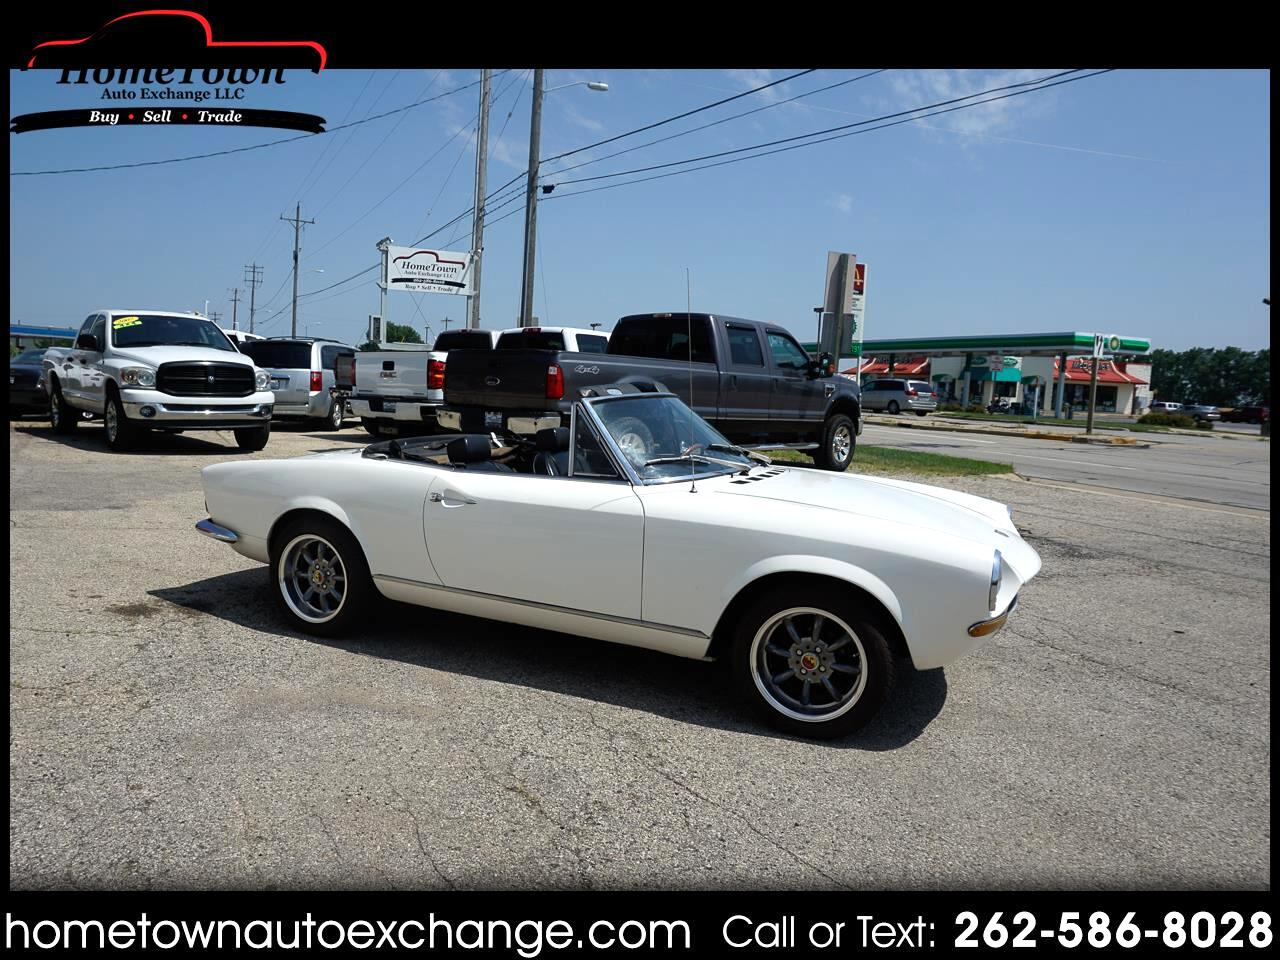 Used 1972 Fiat 124 Spider Abarth Convertible For Sale In Salem Wi 53168 Hometown Auto Exchange Llc